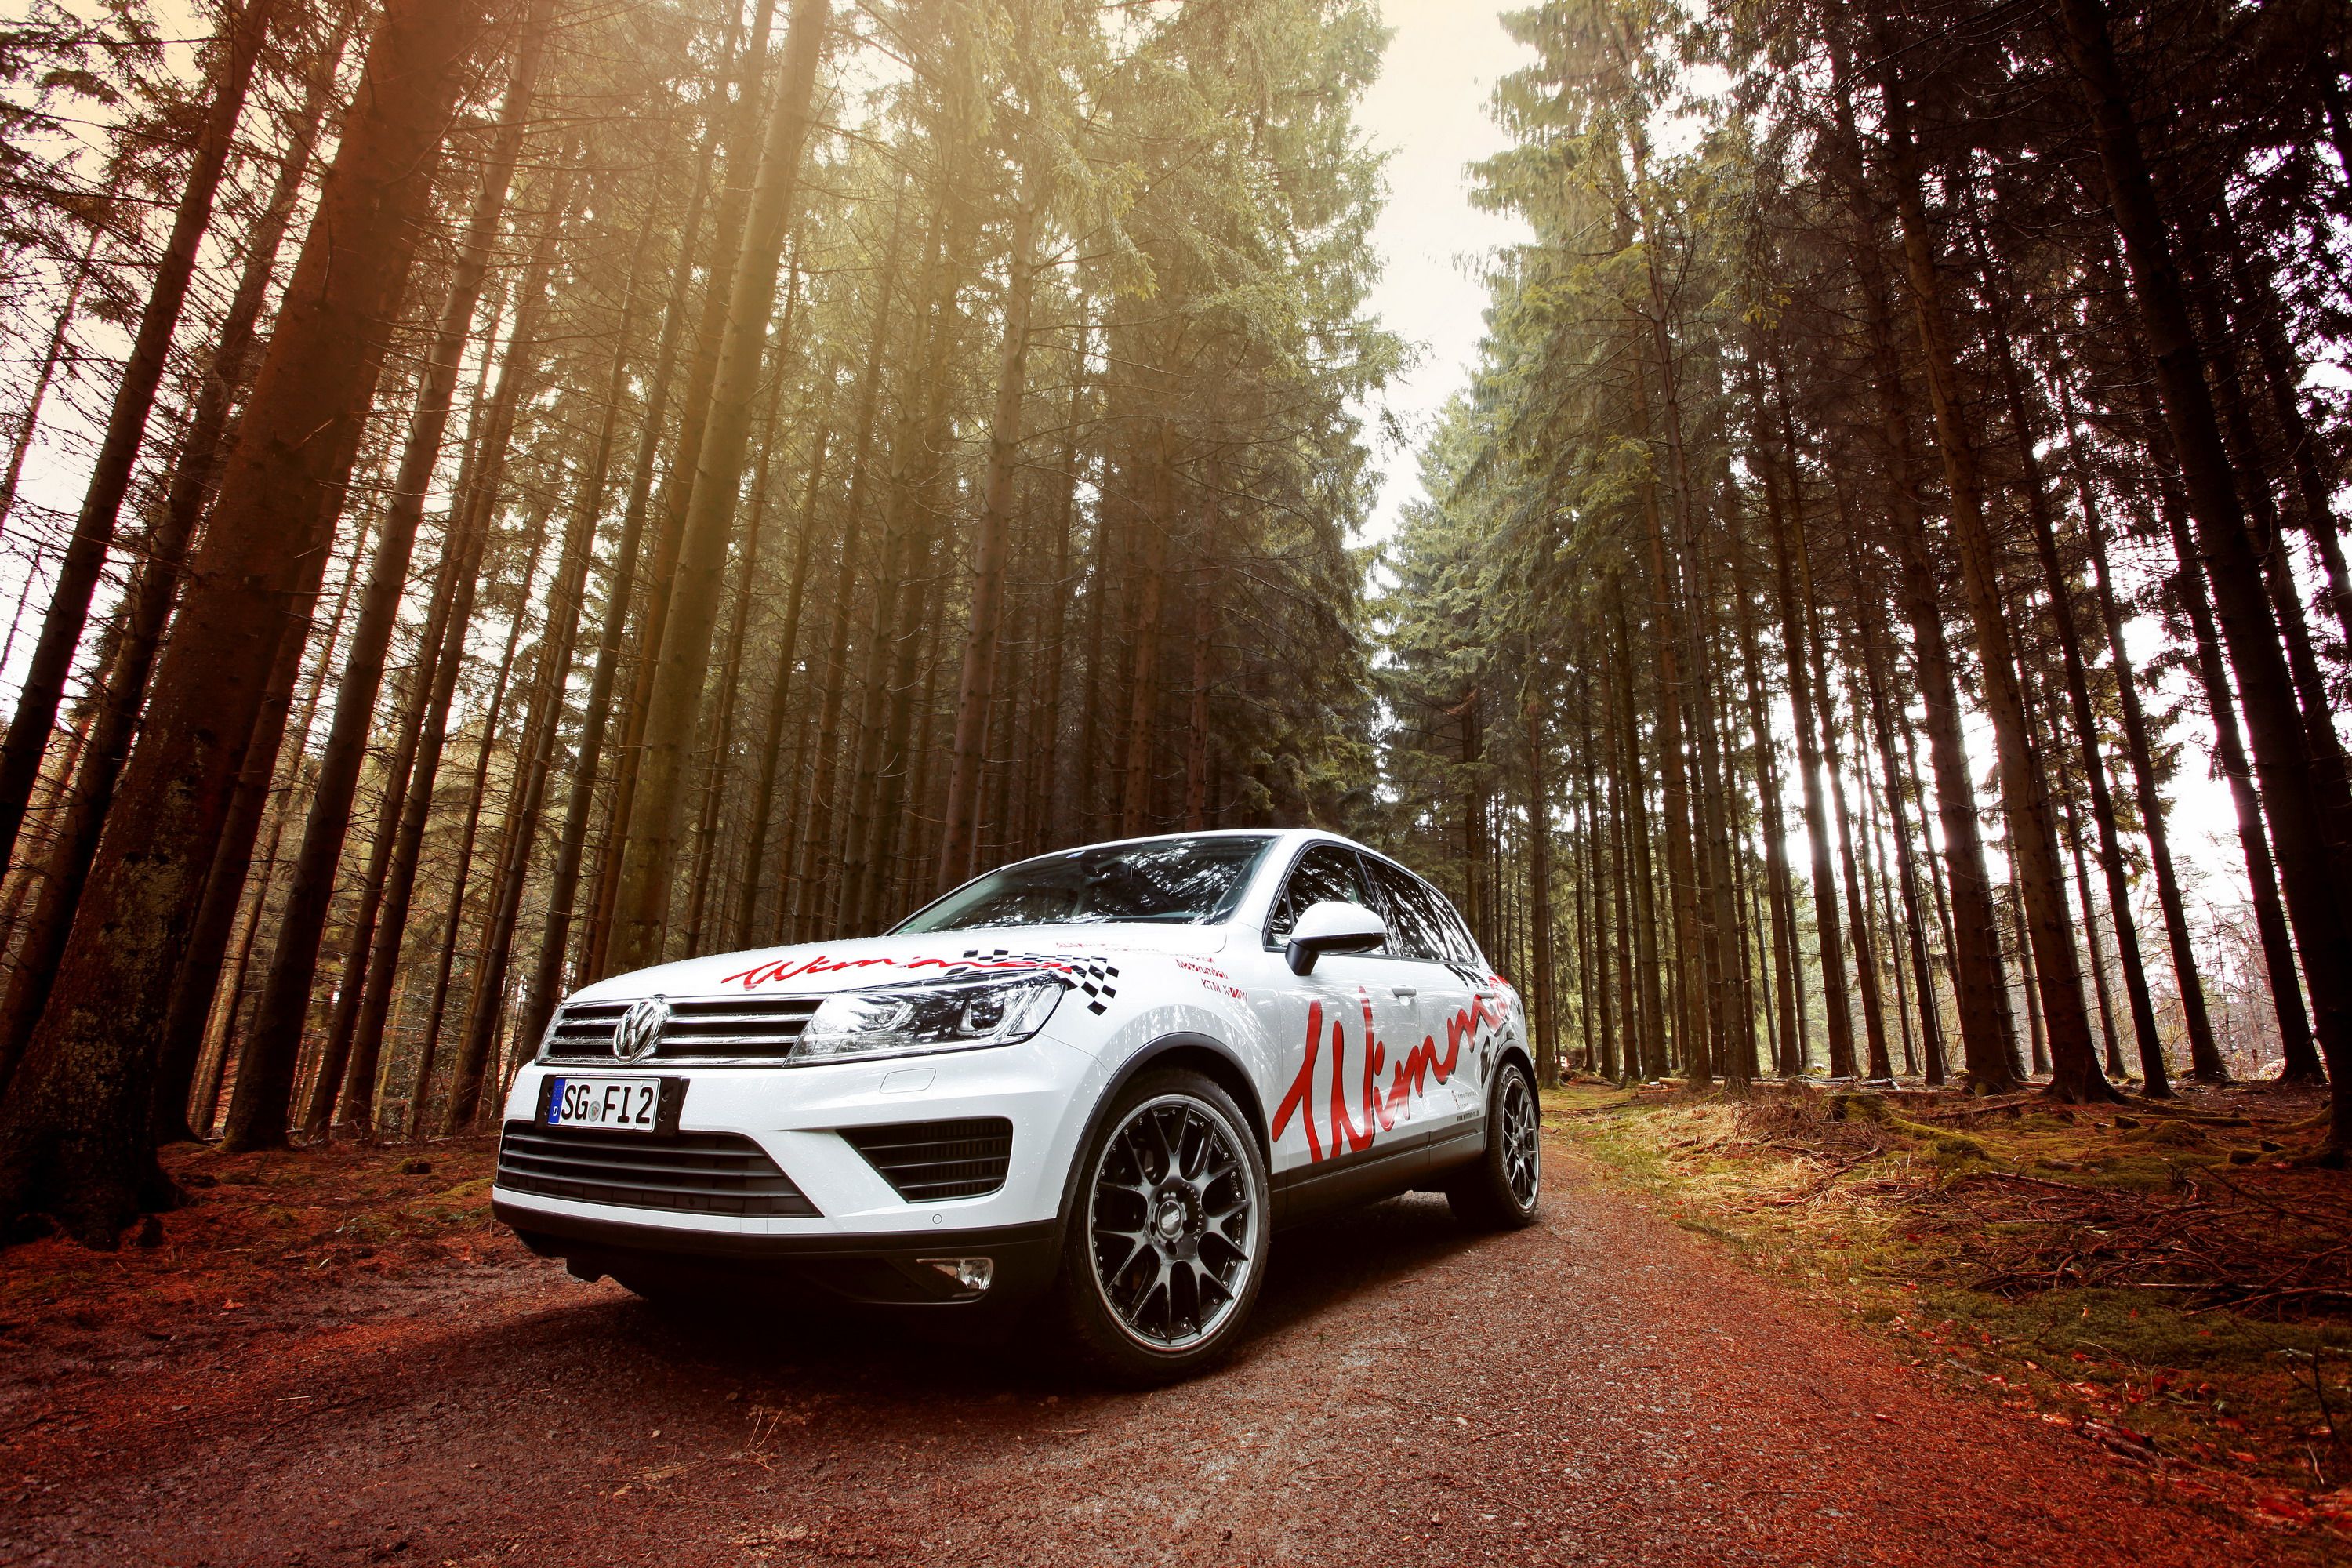 2016 Volkswagen Touareg by Wimmer RS